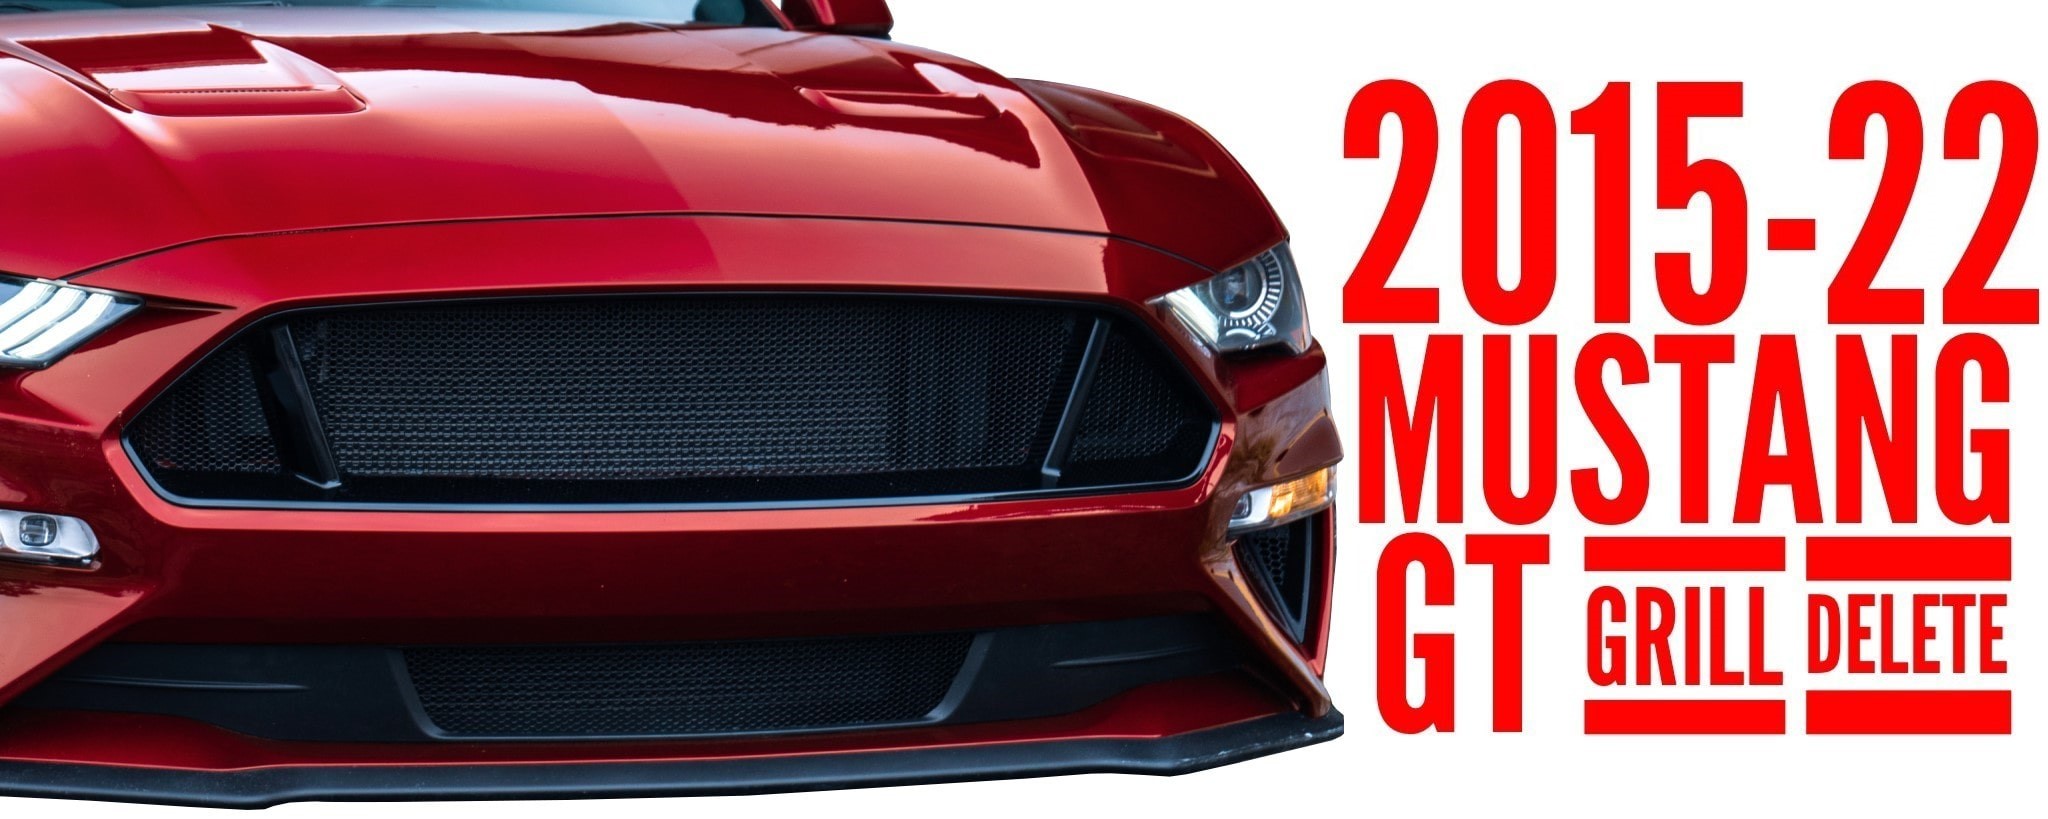 6th Gen Ford Mustang GT Mesh Inserts